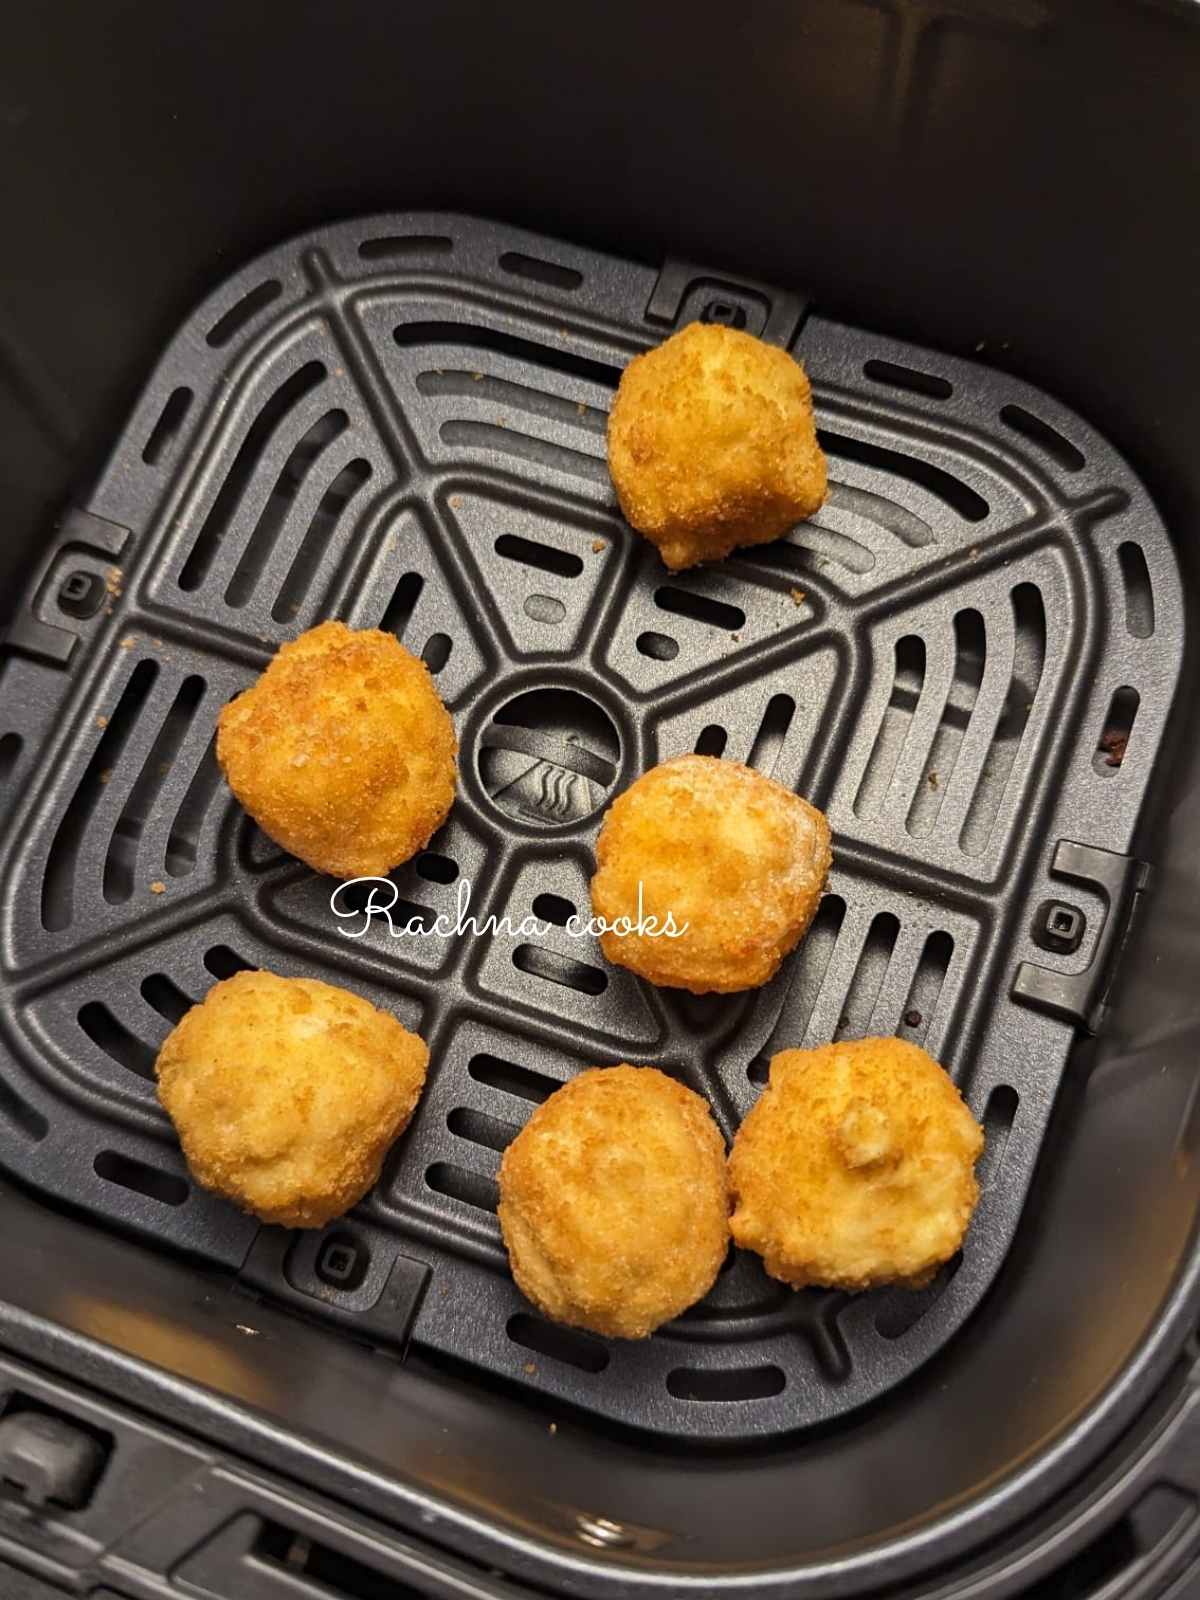 Frozen mac and cheese bites placed in air fryer basket